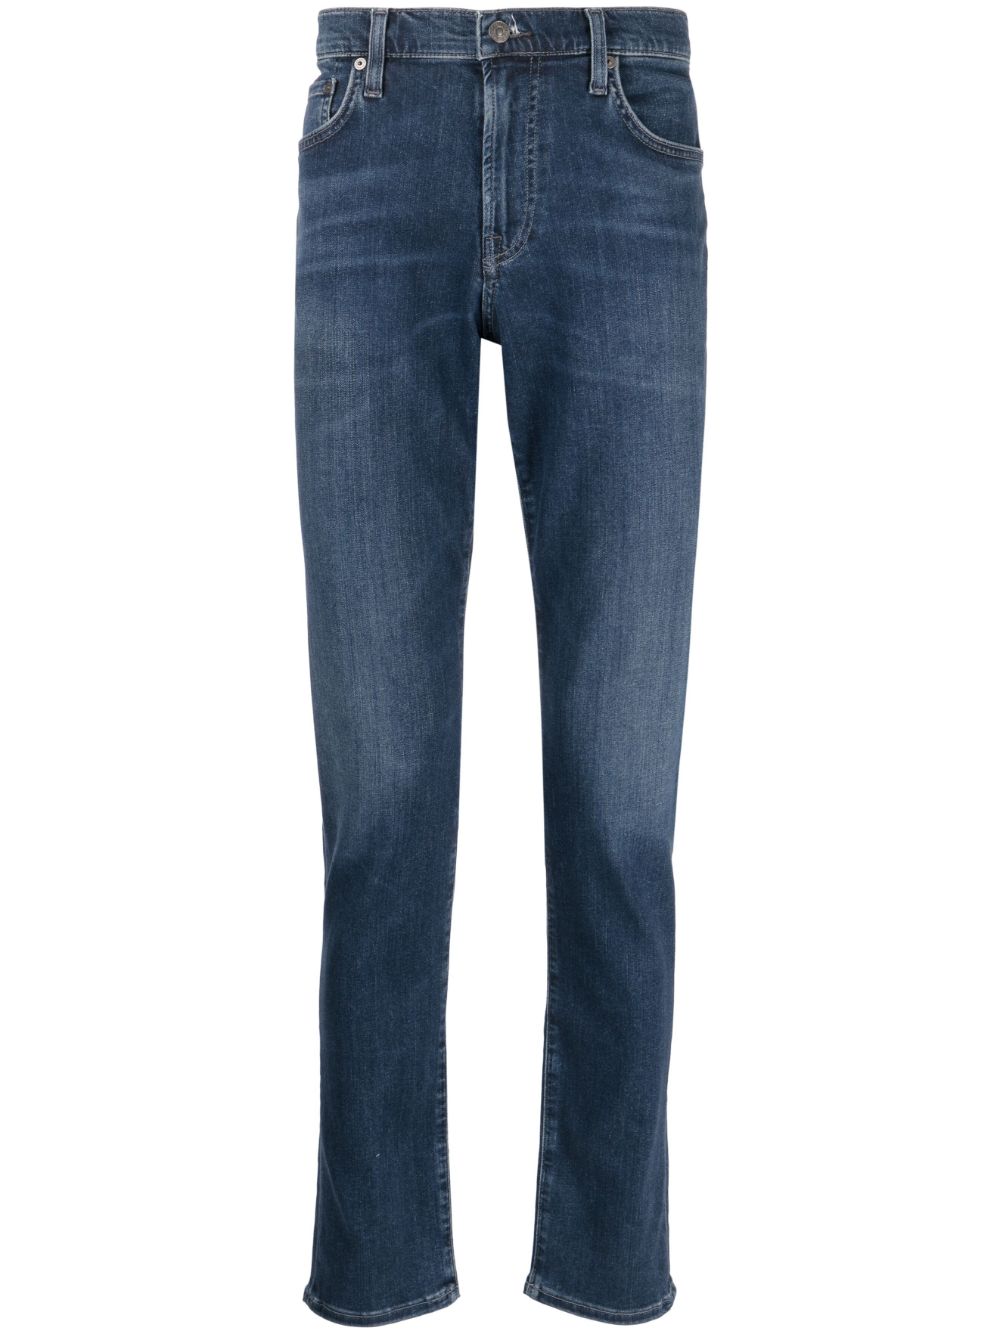 Citizens of Humanity low-rise slim-cut jeans - Blue